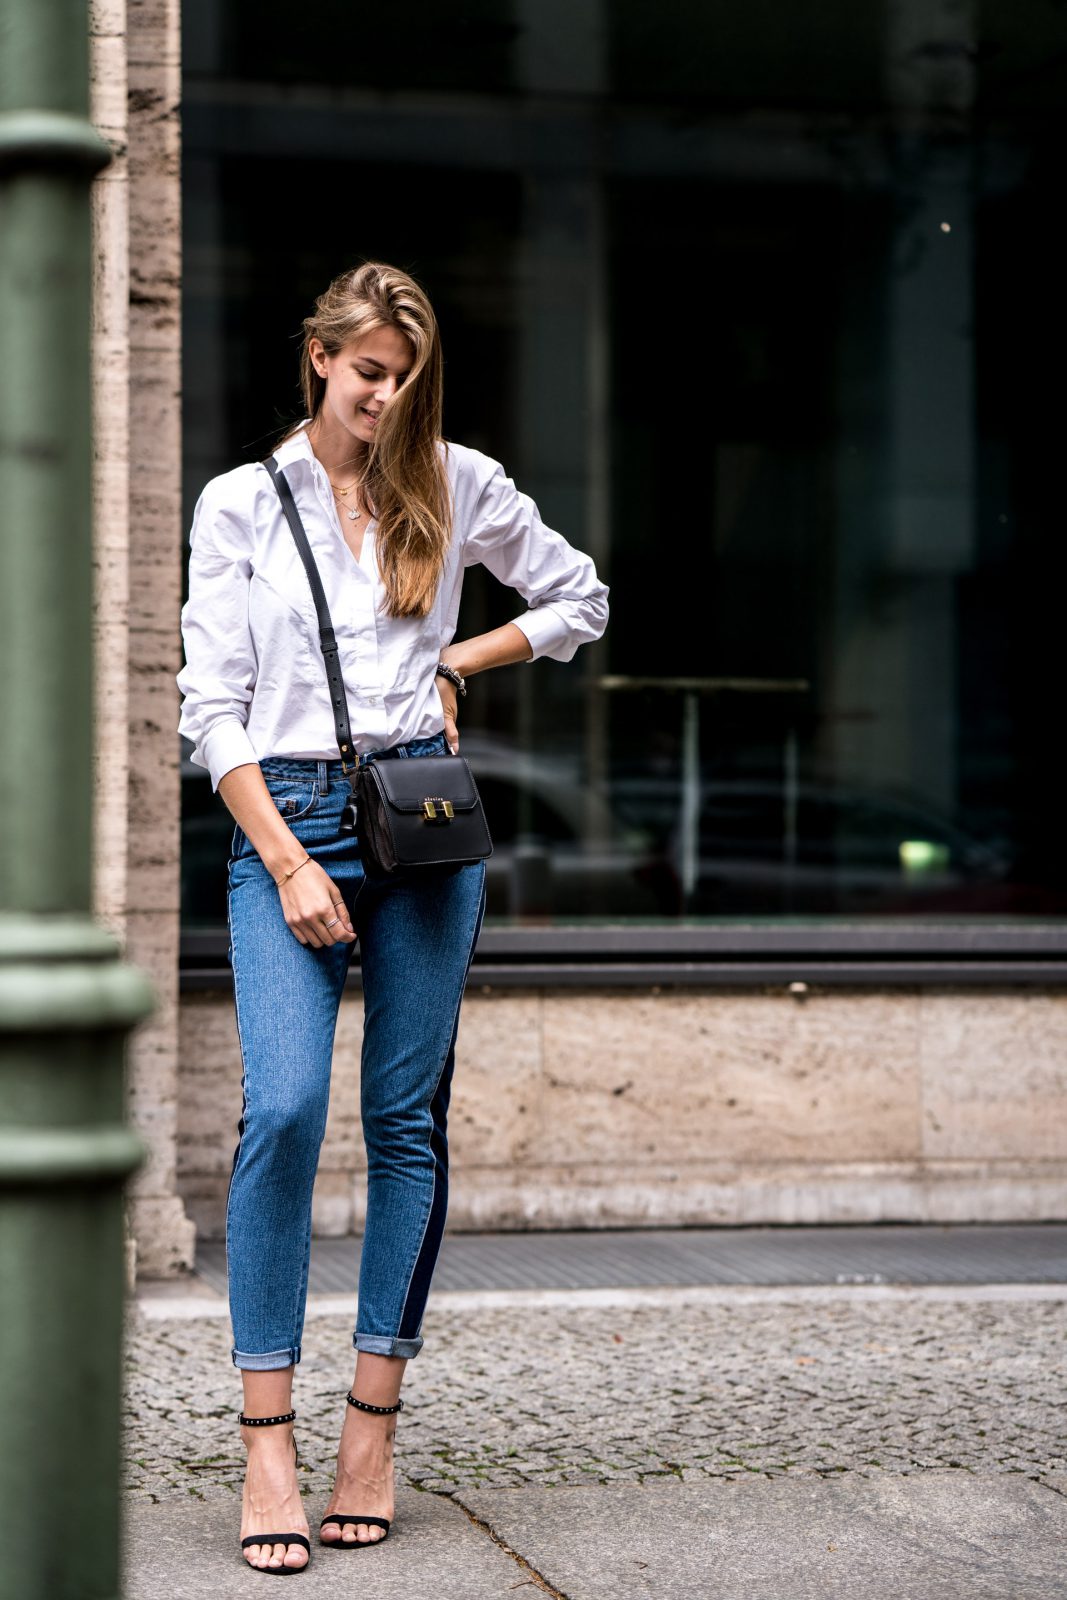 Two-Toned Denim and White Shirt || Fashion Week Outfit Berlin 2017